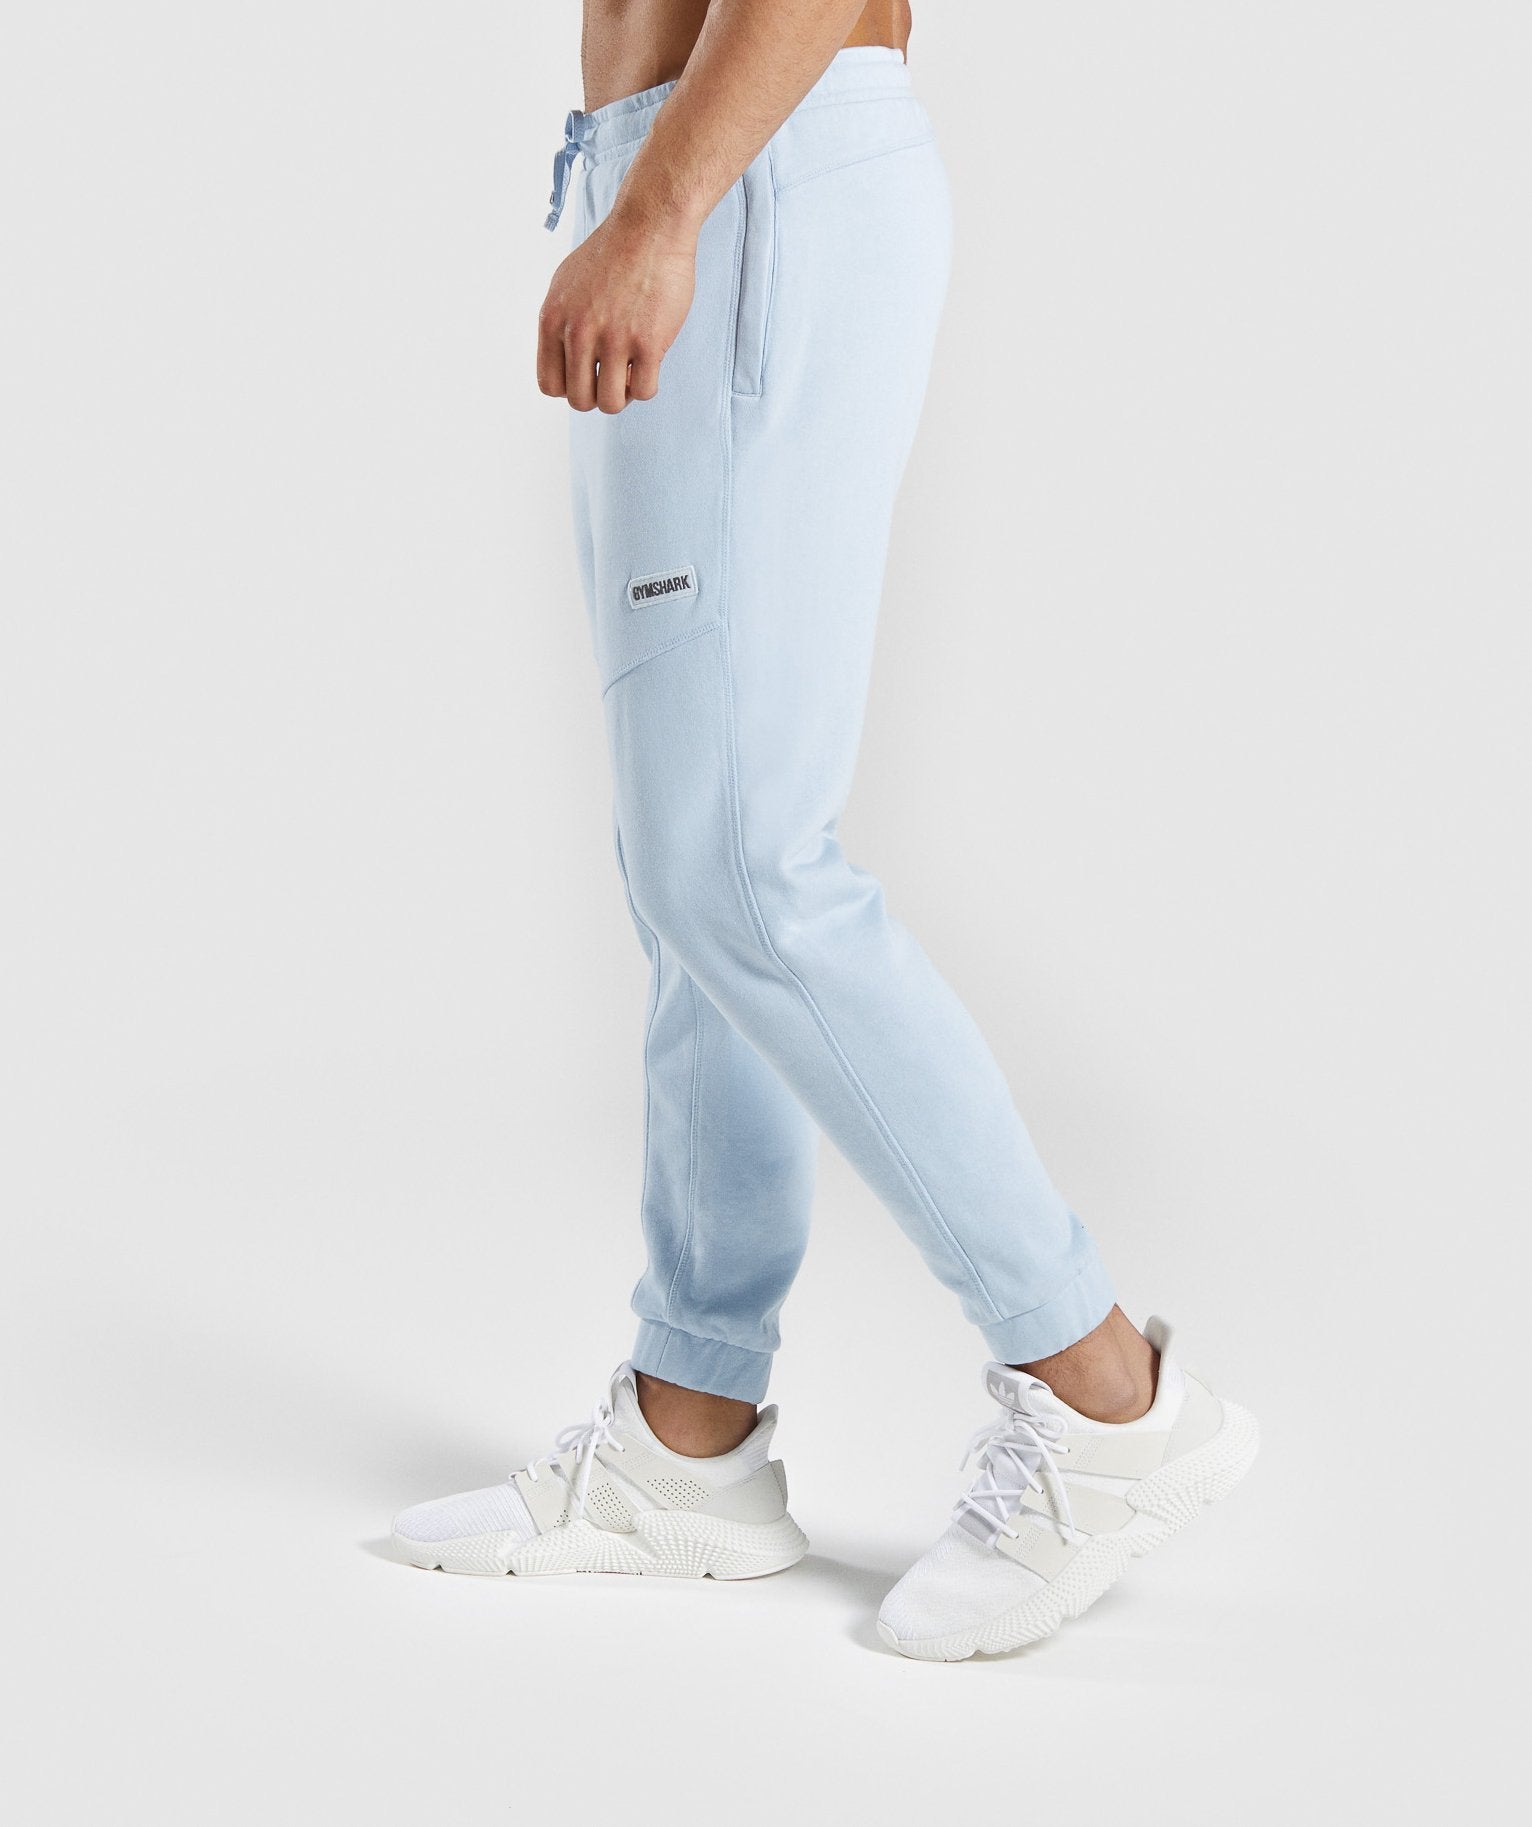 Laundered Joggers in Light Blue - view 3